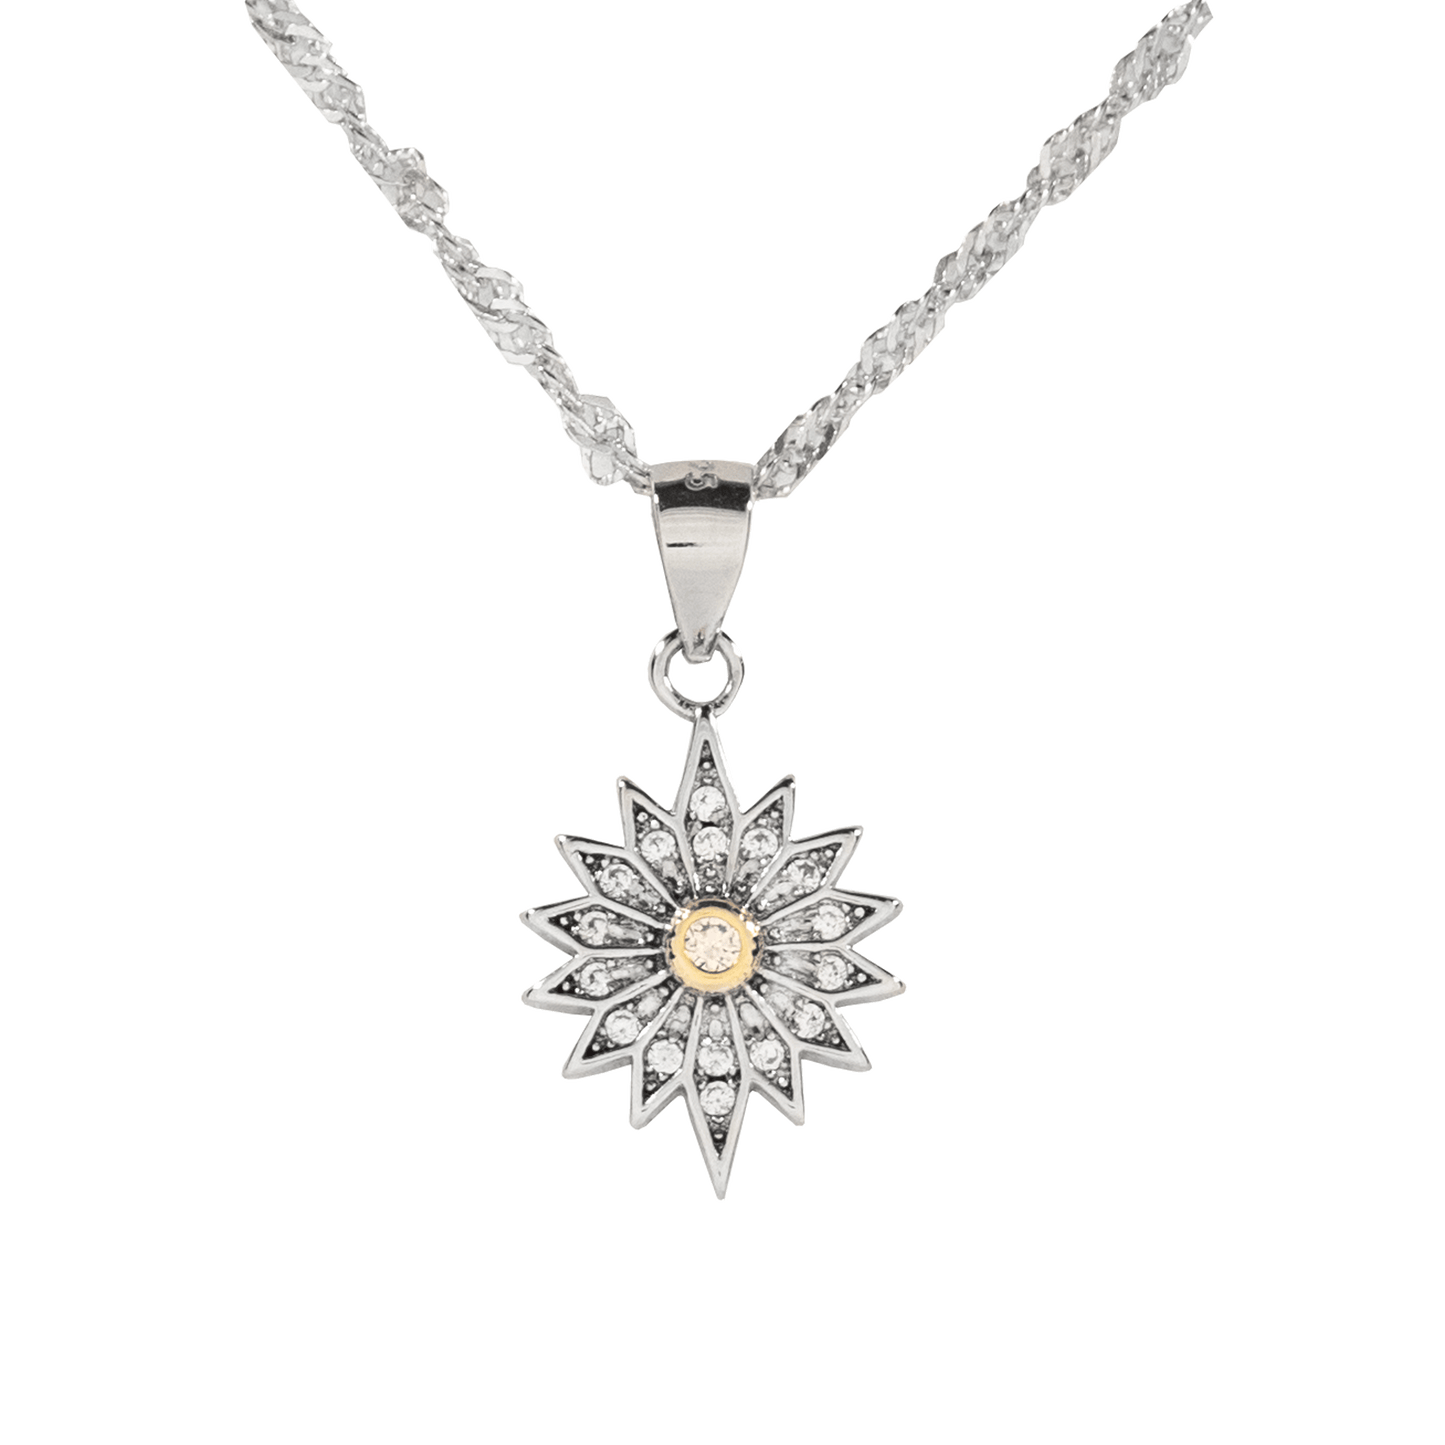 Bethlehem Star Necklace with crystals and golden inner circle on sterling silver rope chain